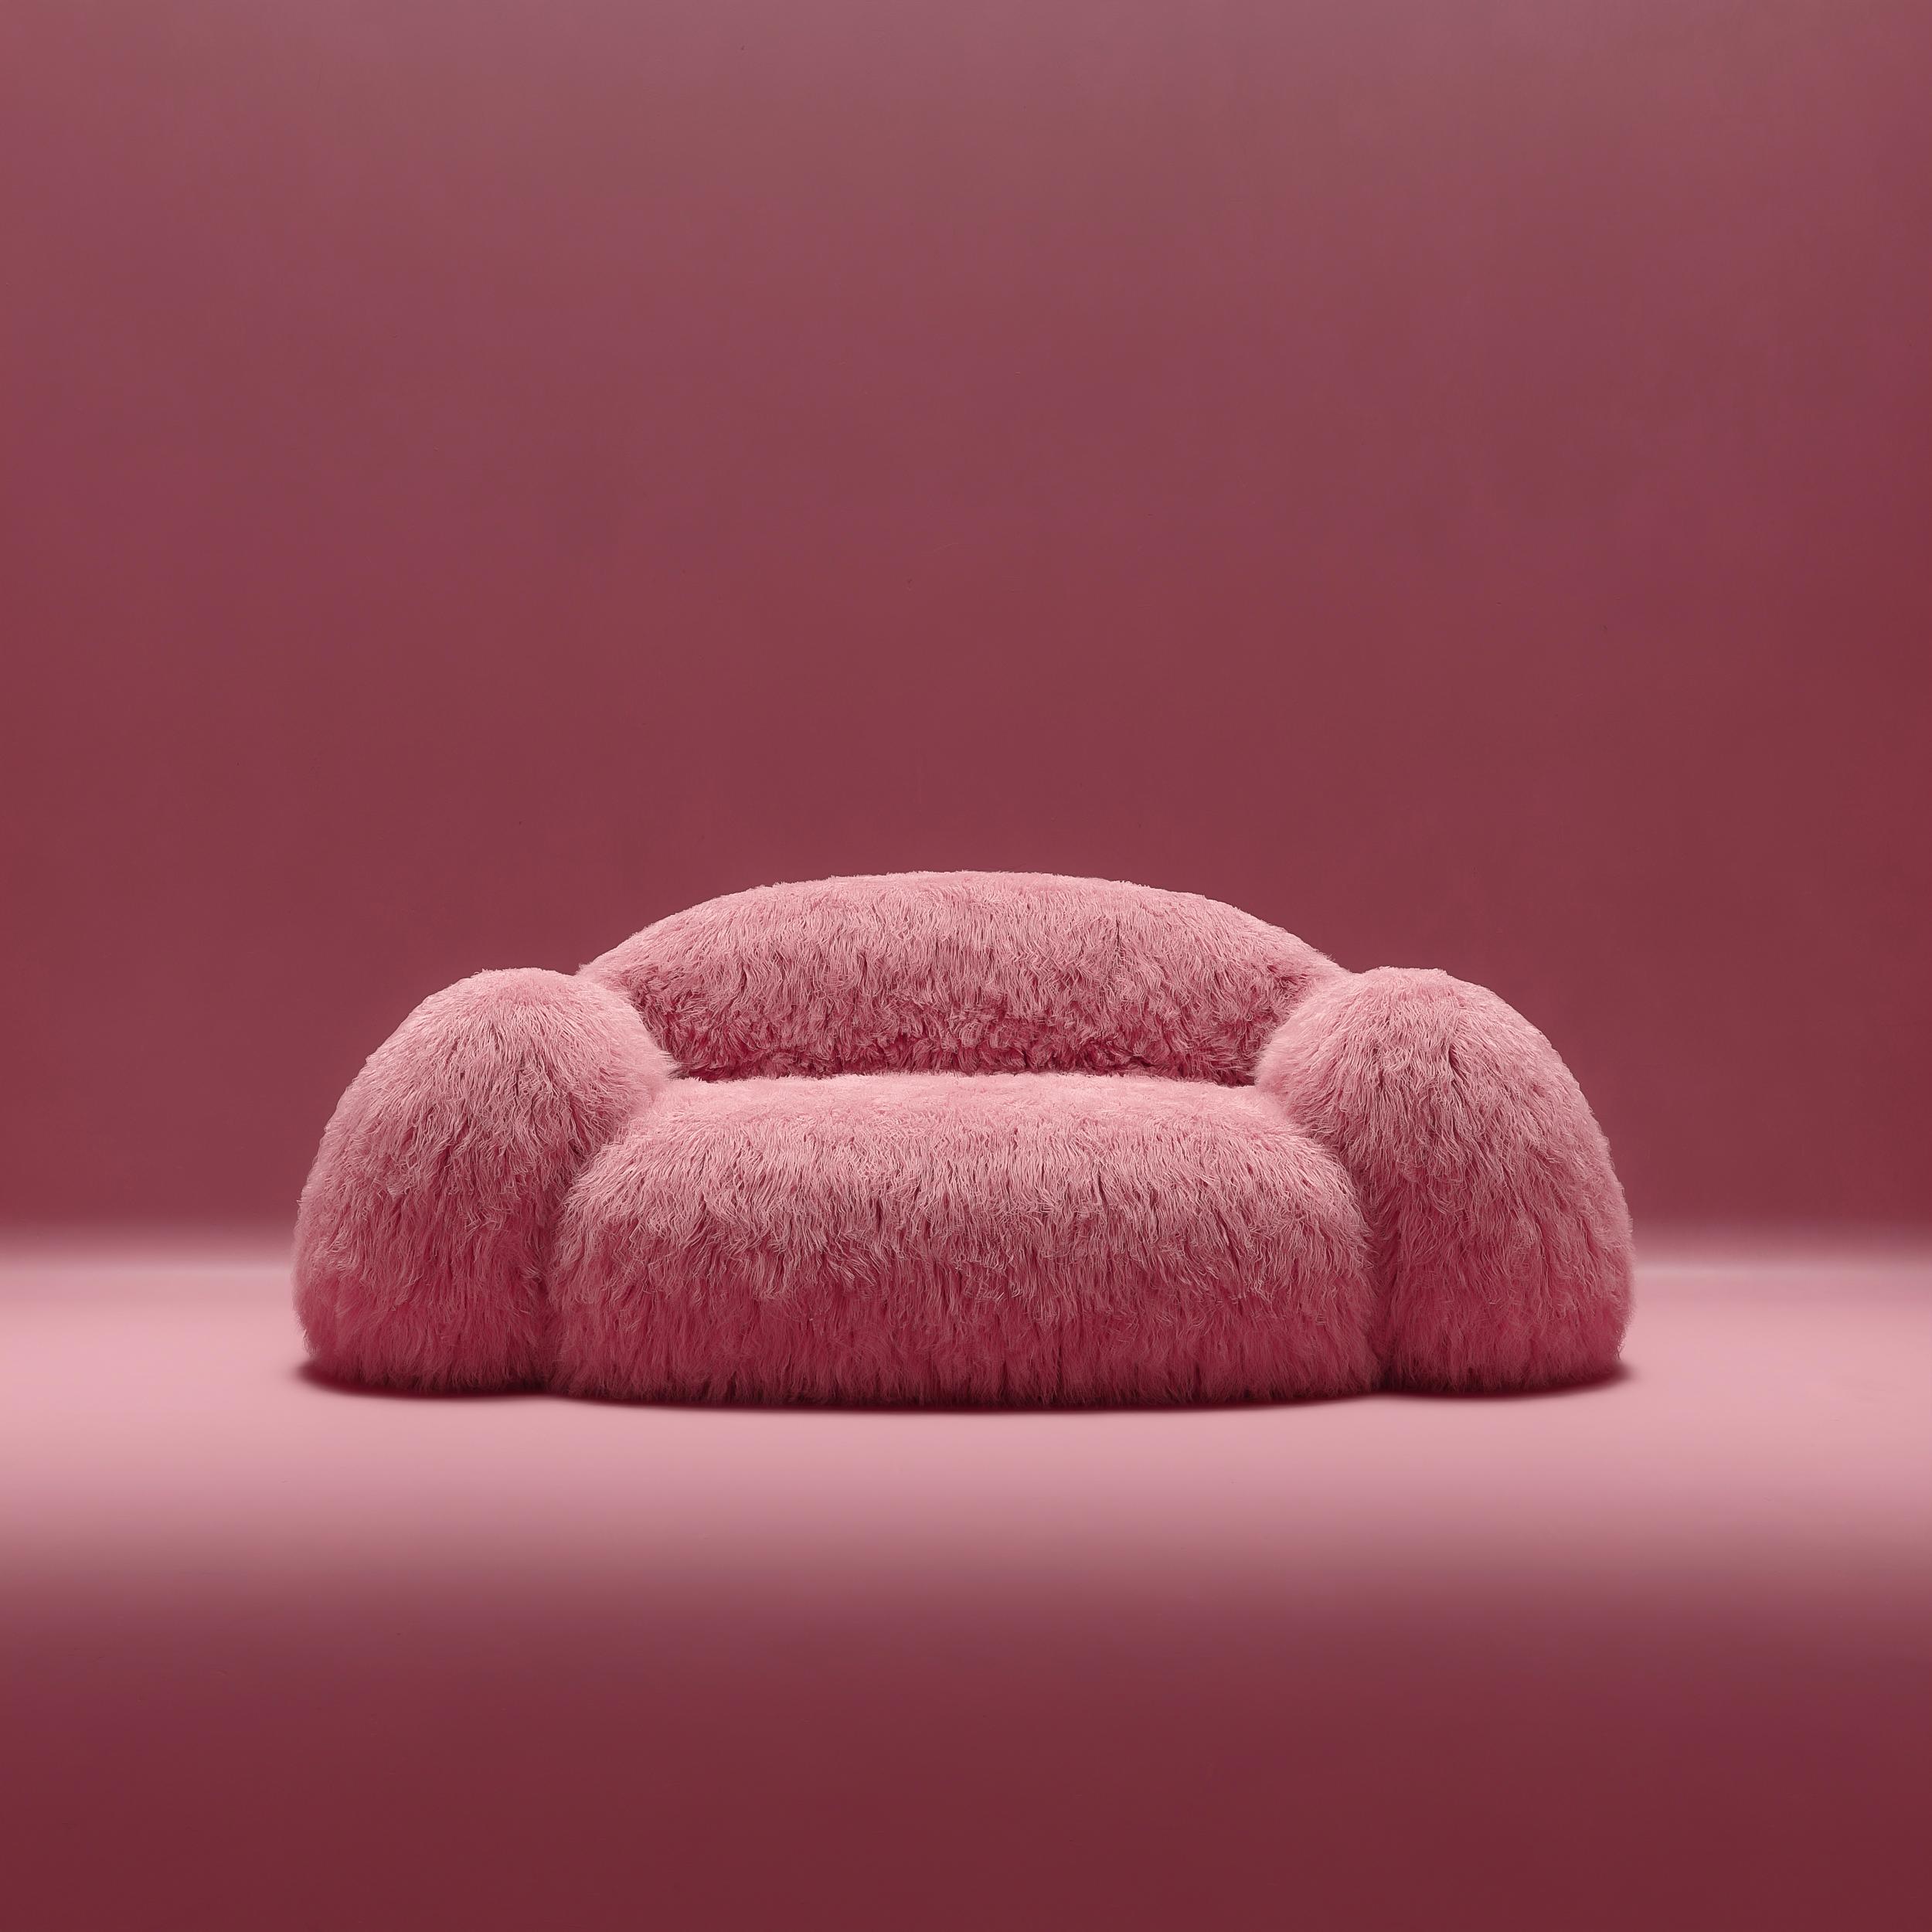 Yeti sofa by NUMO.
Dimensions: H 80 x W 210 x L 110 cm
Materials: Faux Lama Fur

Yeti furniture series – minimalistic and huge, a soft and cozy pink cloud. Its bloated forms seem to cover you with a feeling of comfort, while the faux lama fur just